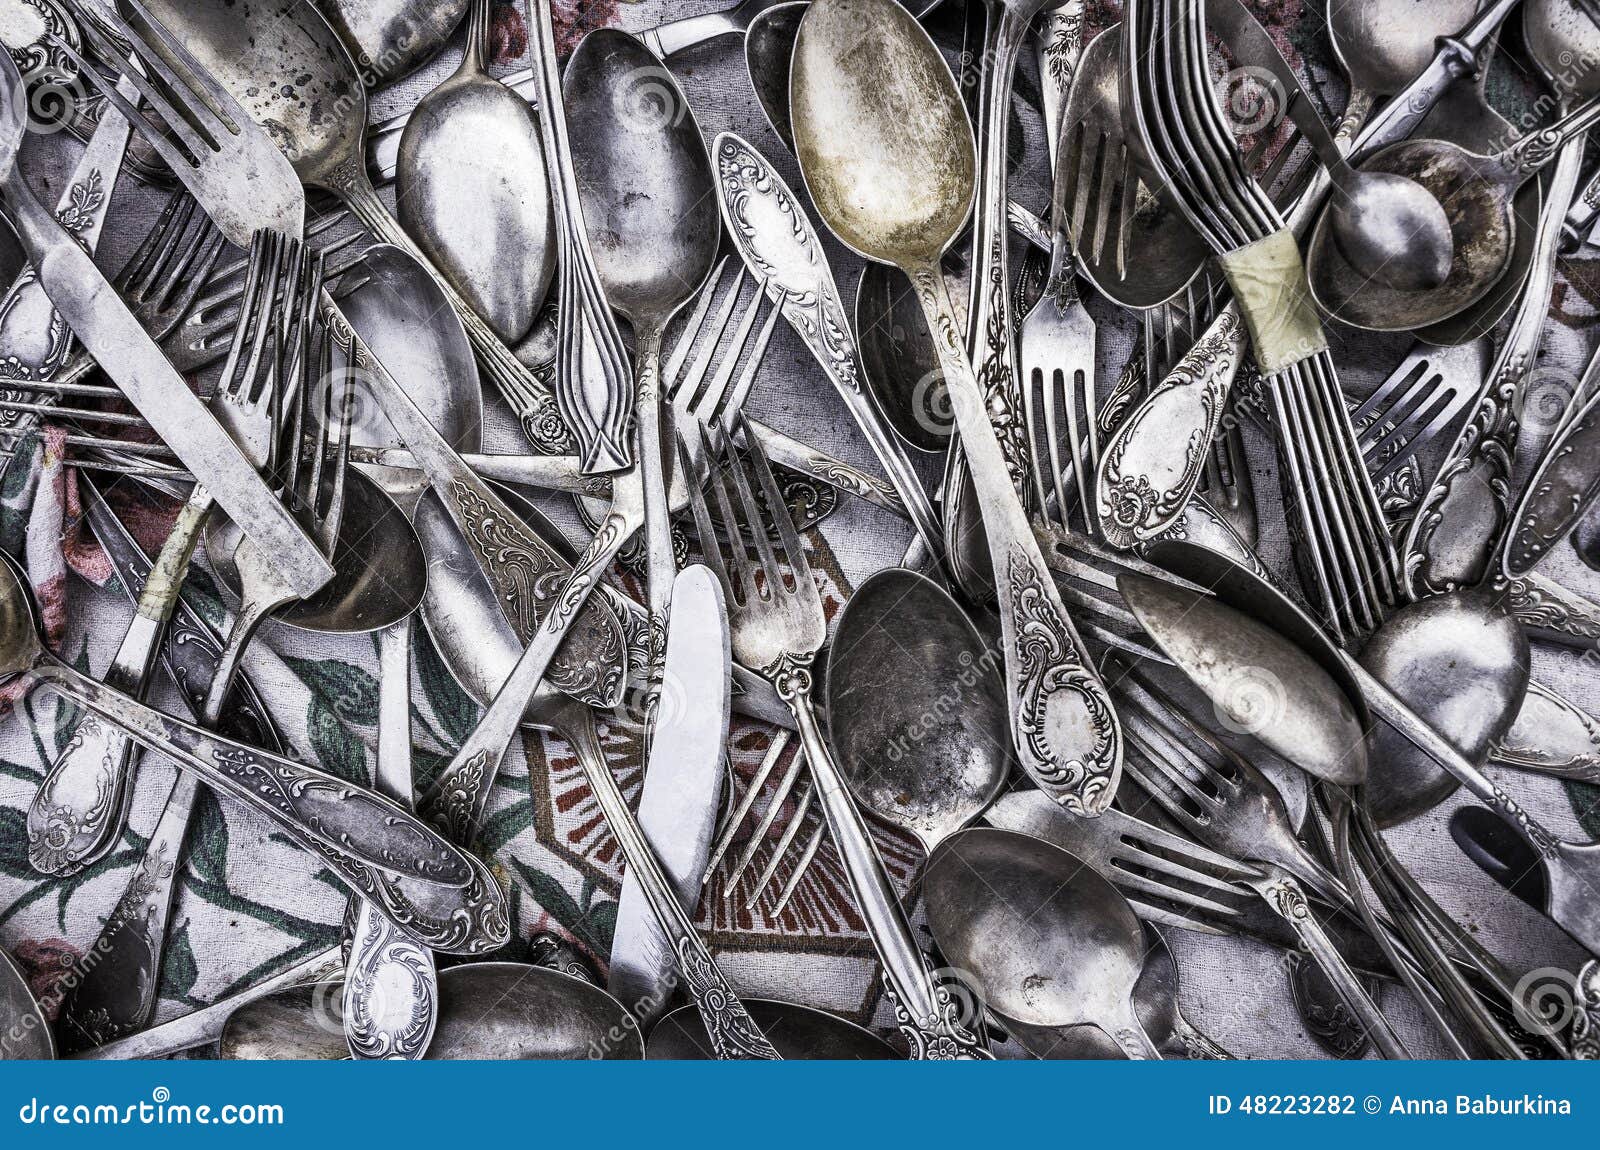 old cutlery